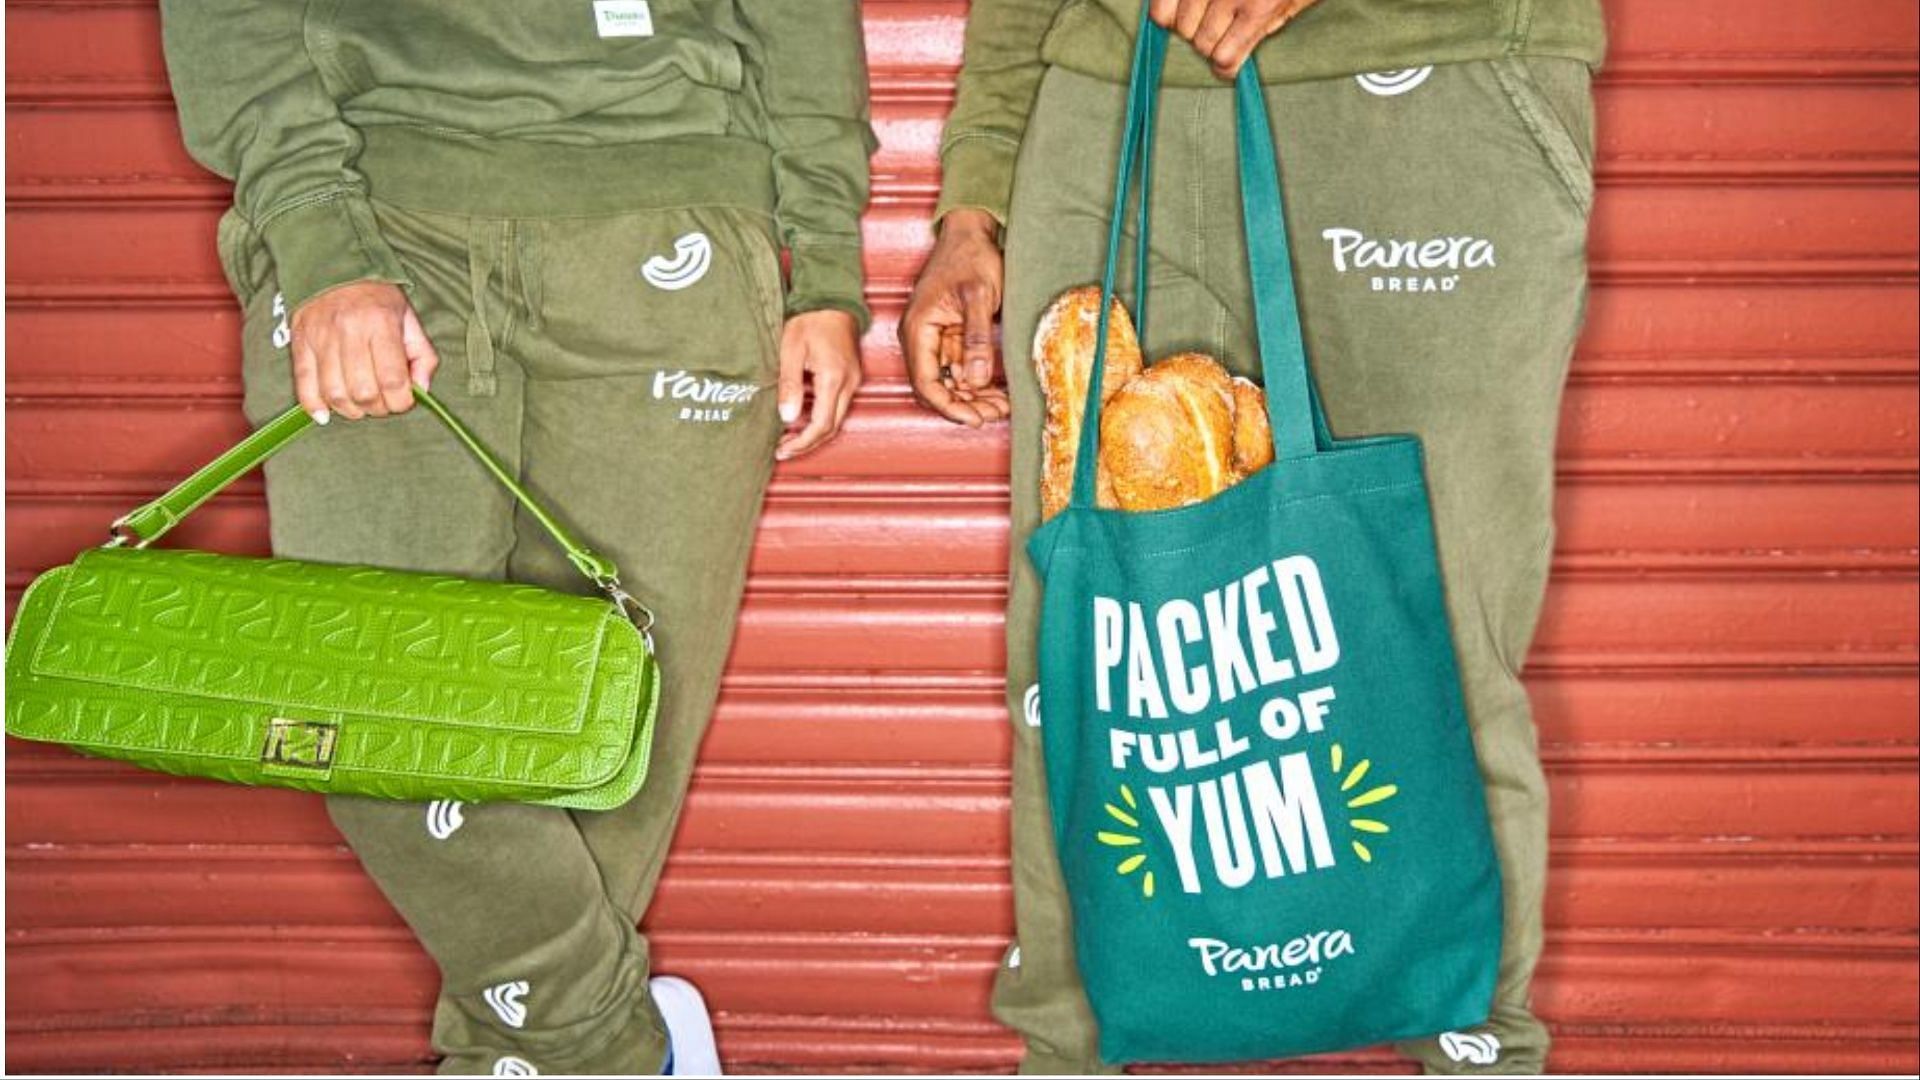 Panera Faves merchandise how to avail, deals, availability, and all